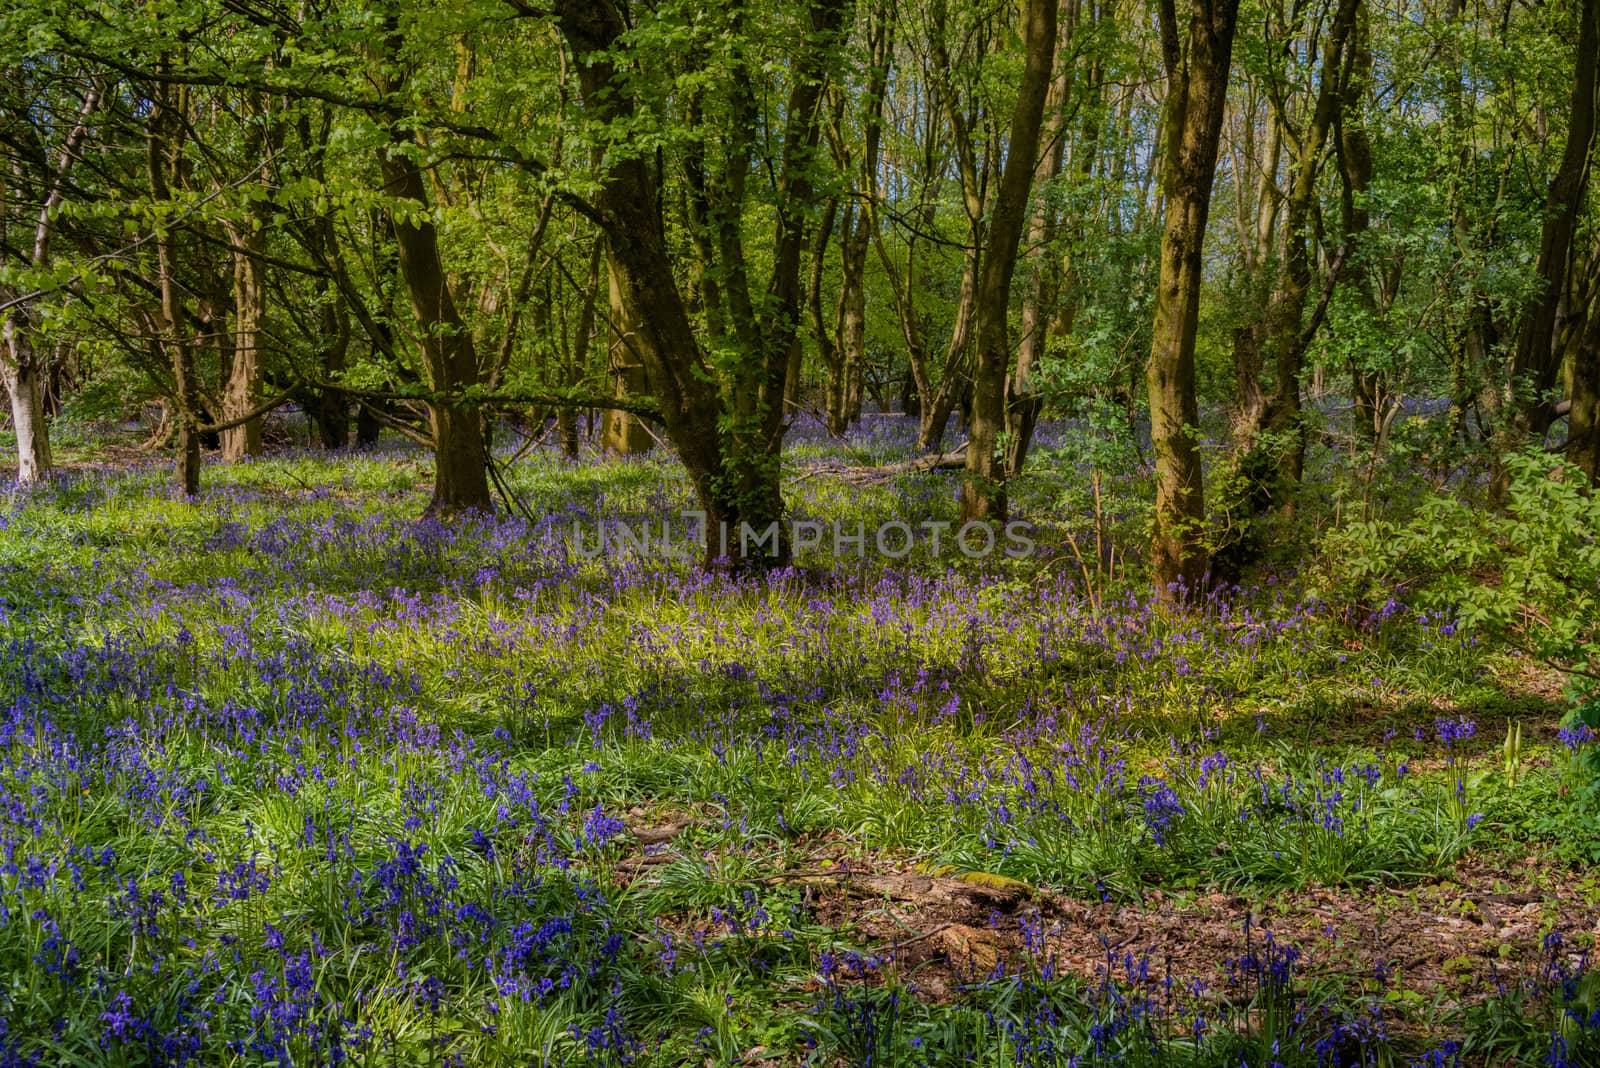 A spread of bluebells cover a small forest floor in early spring.